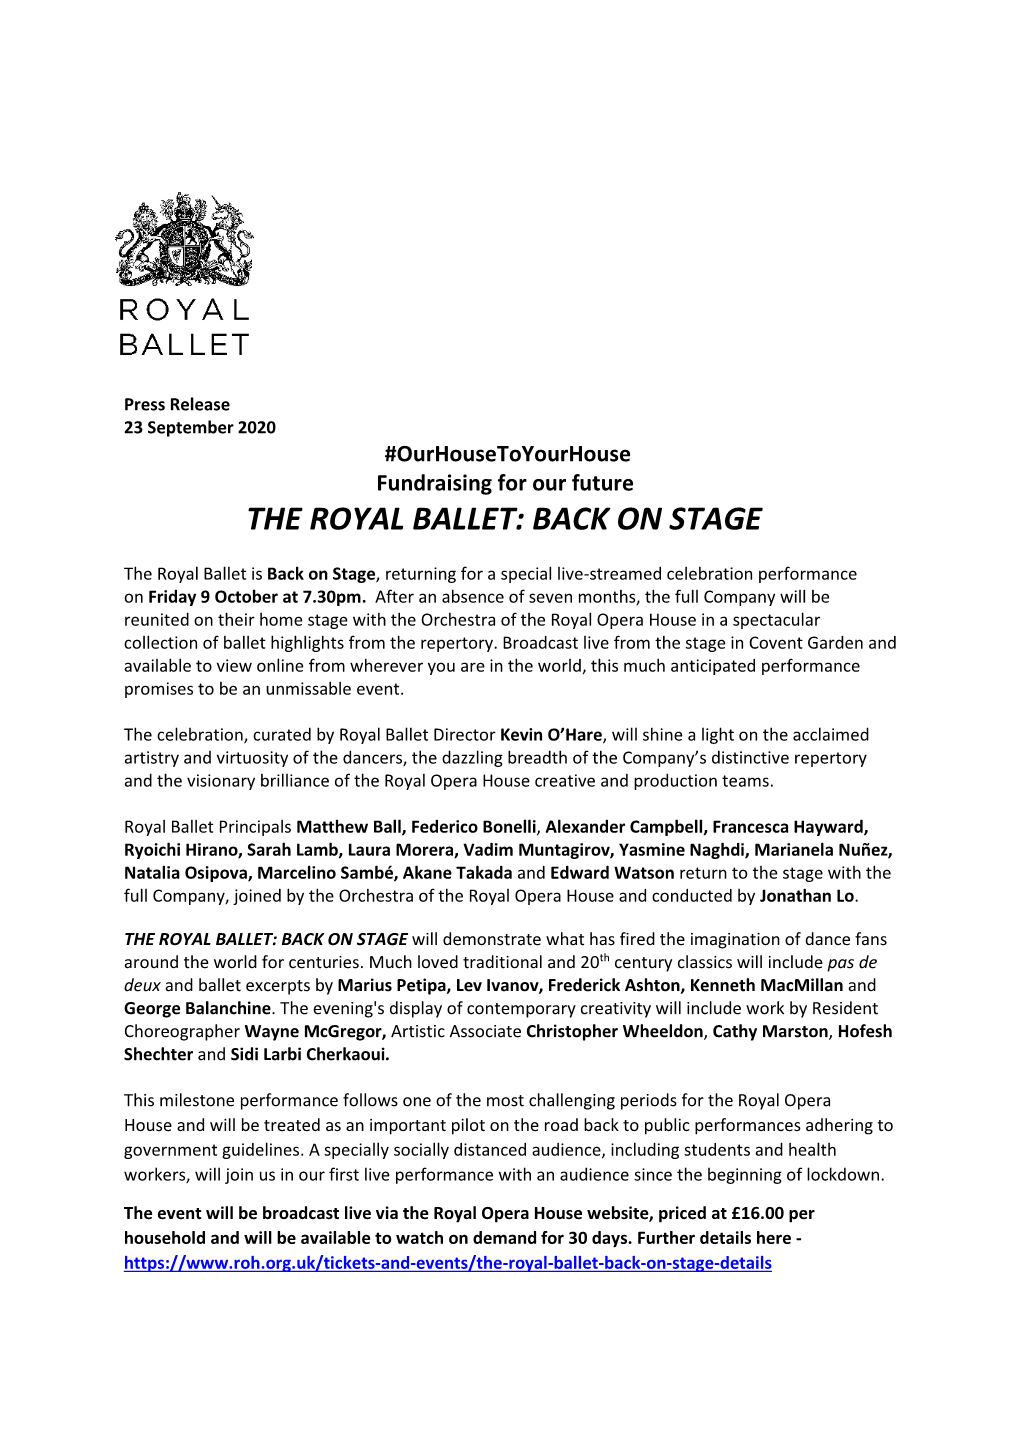 The Royal Ballet: Back on Stage